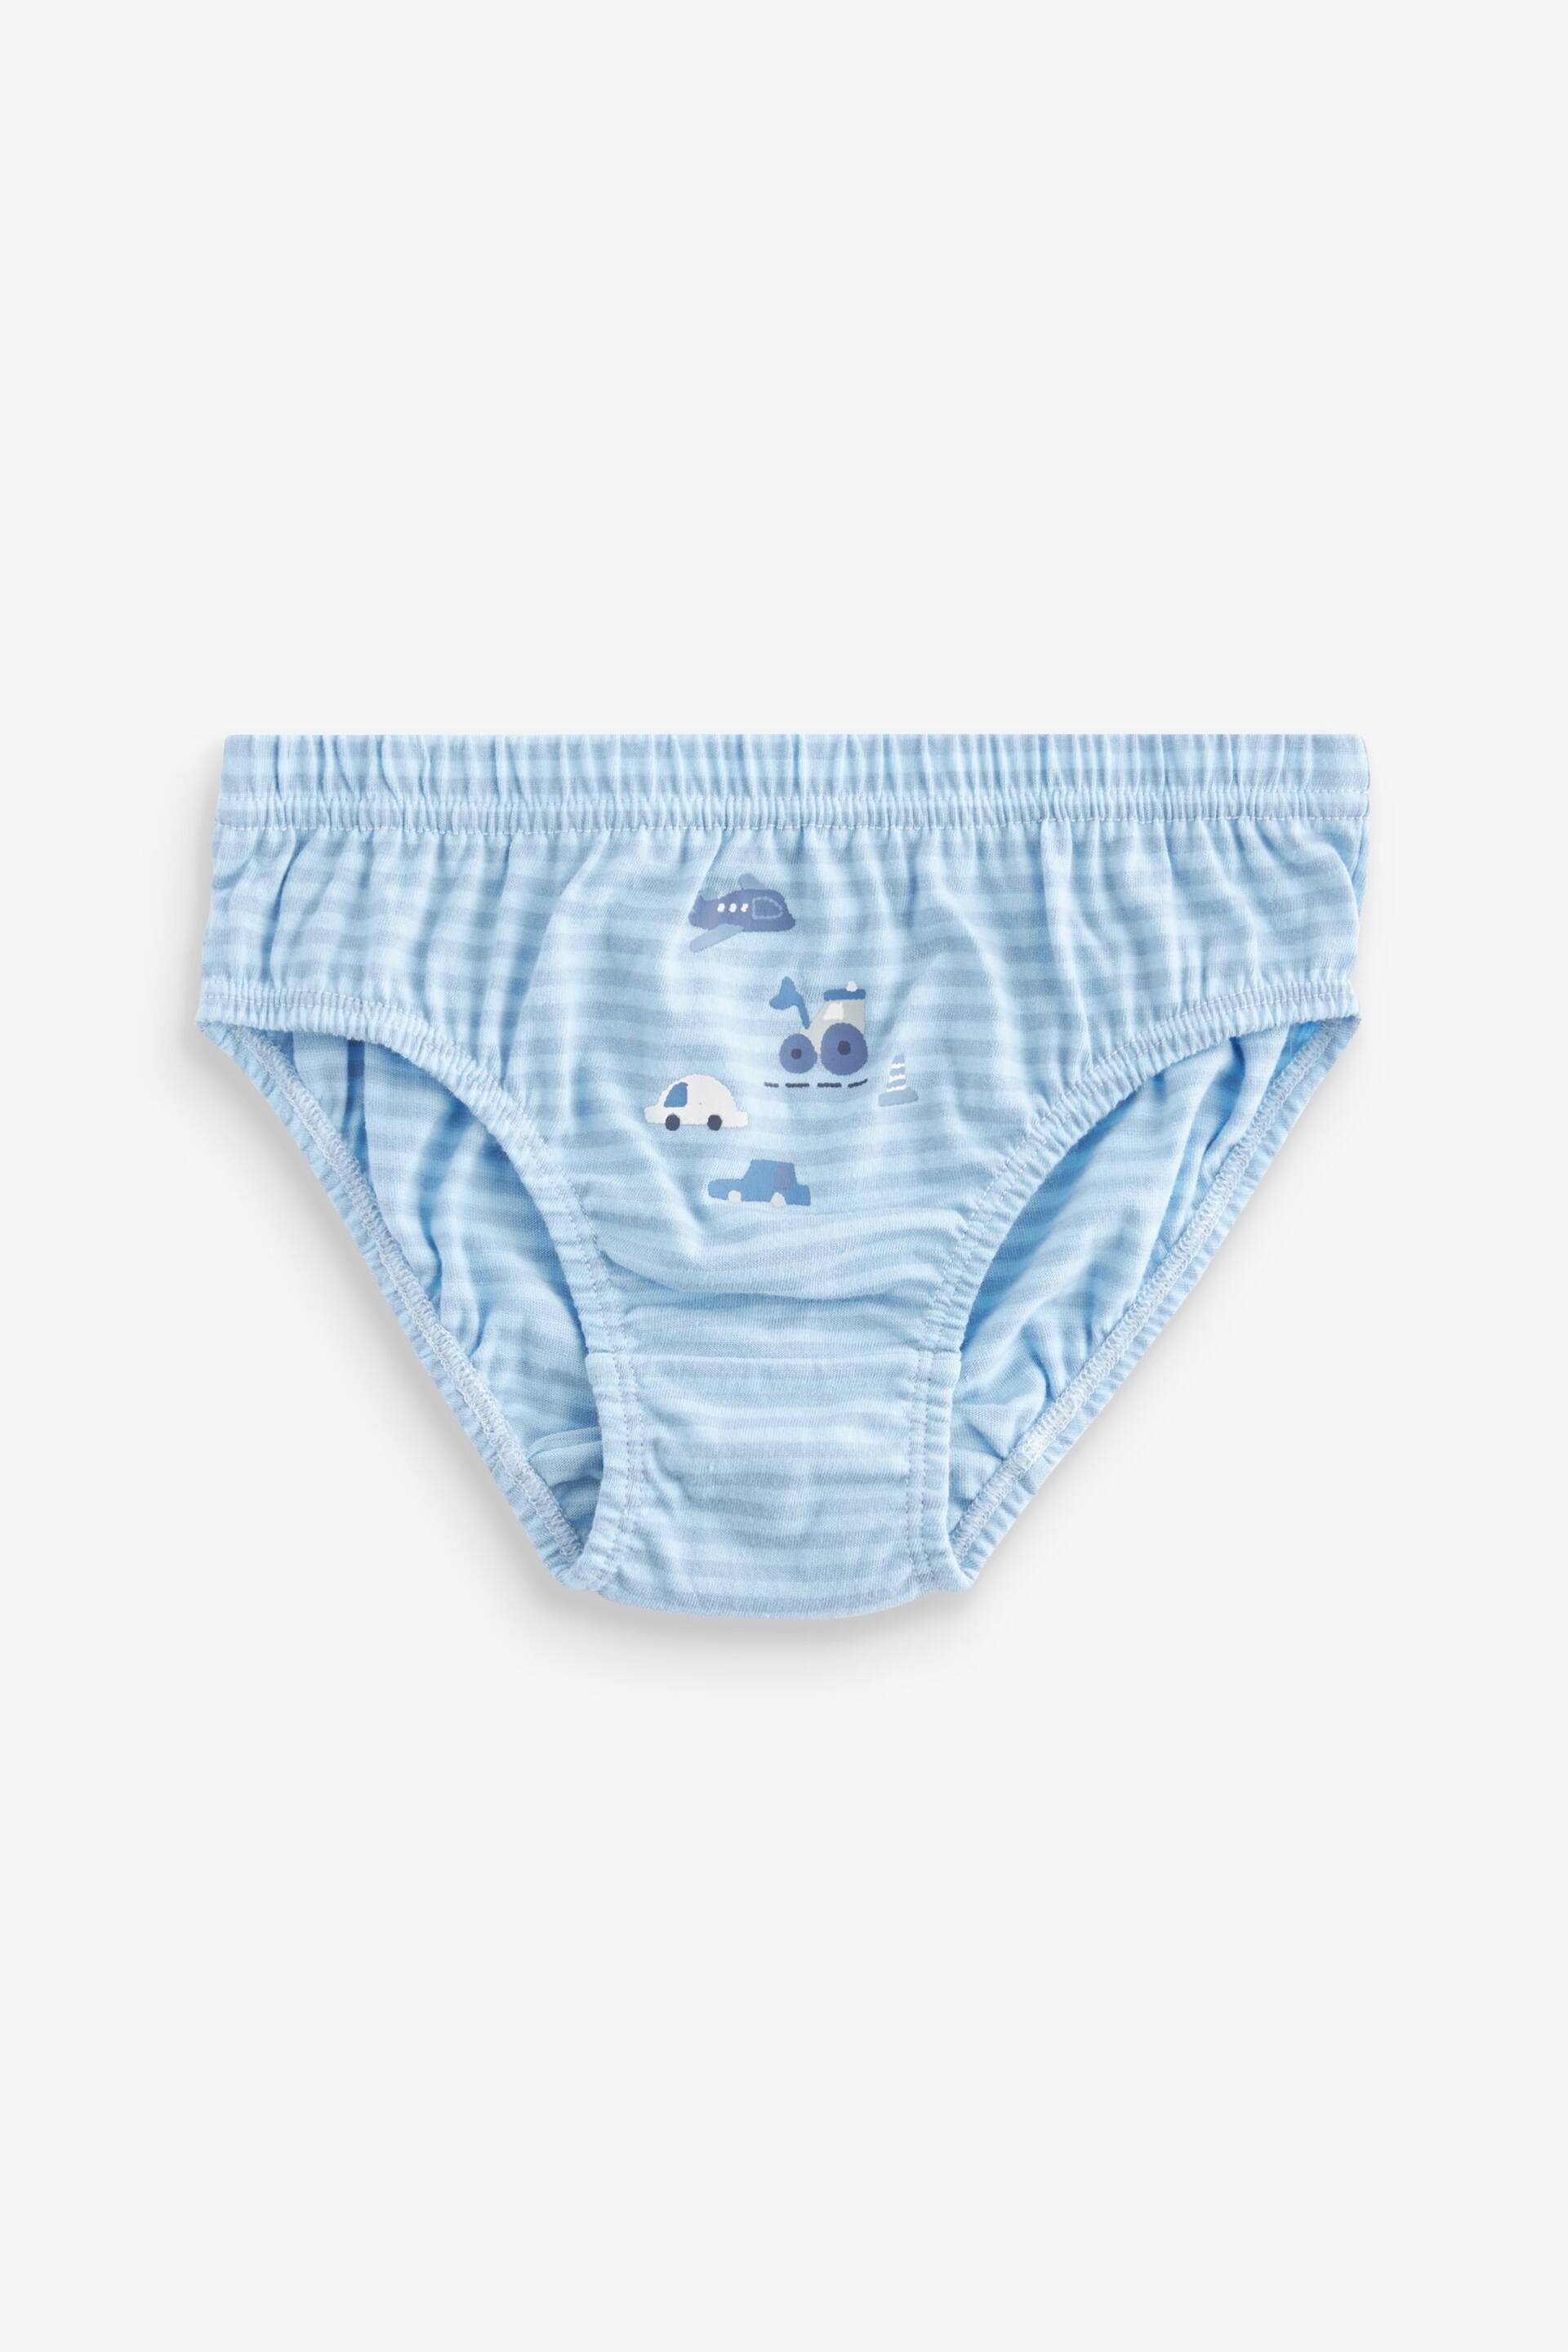 Blue Vehicle Print Briefs 5 Pack (1.5-10yrs) - Image 3 of 8